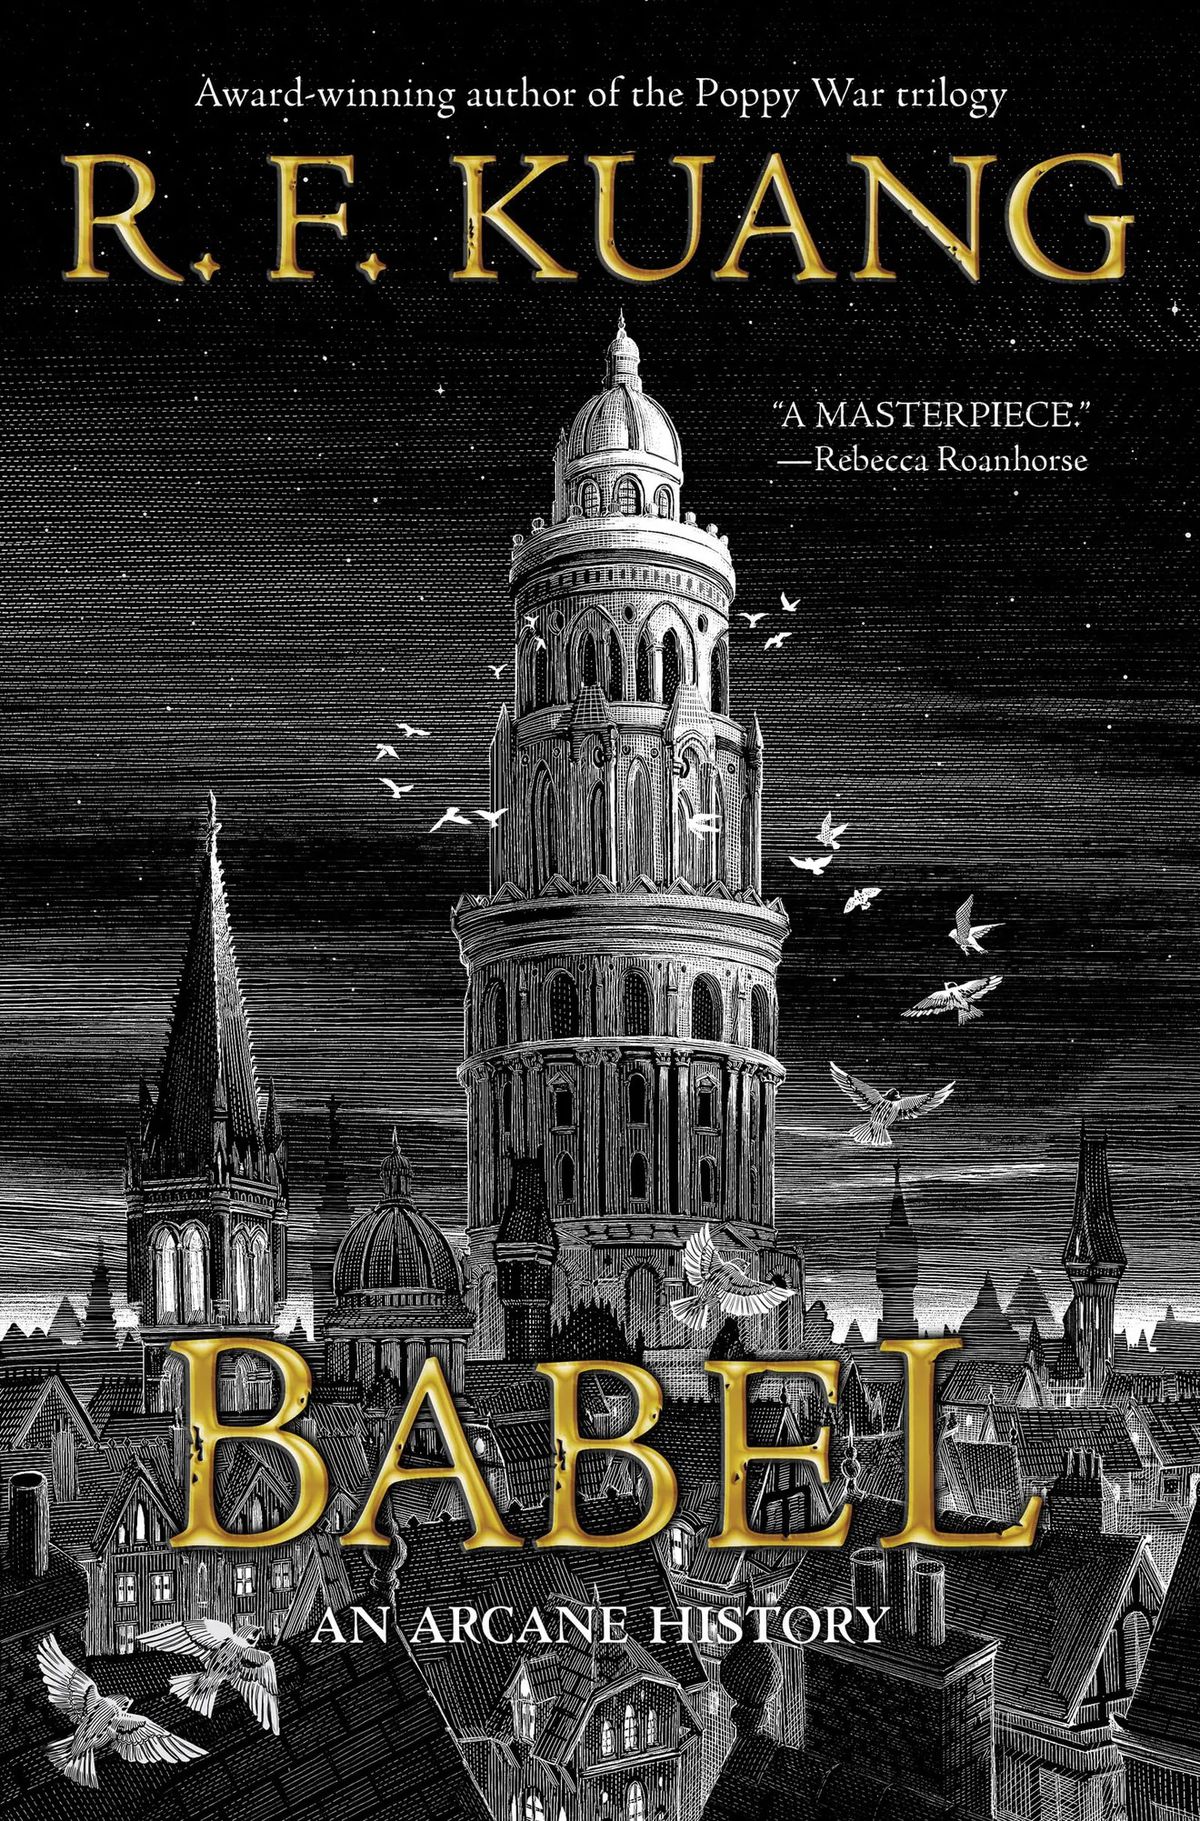 A tall tower with columns stands in the middle of a city full of slanted roofs and smaller towers, with a flock of birds circling it, on the cover to R.F. Kuang’s Babel.